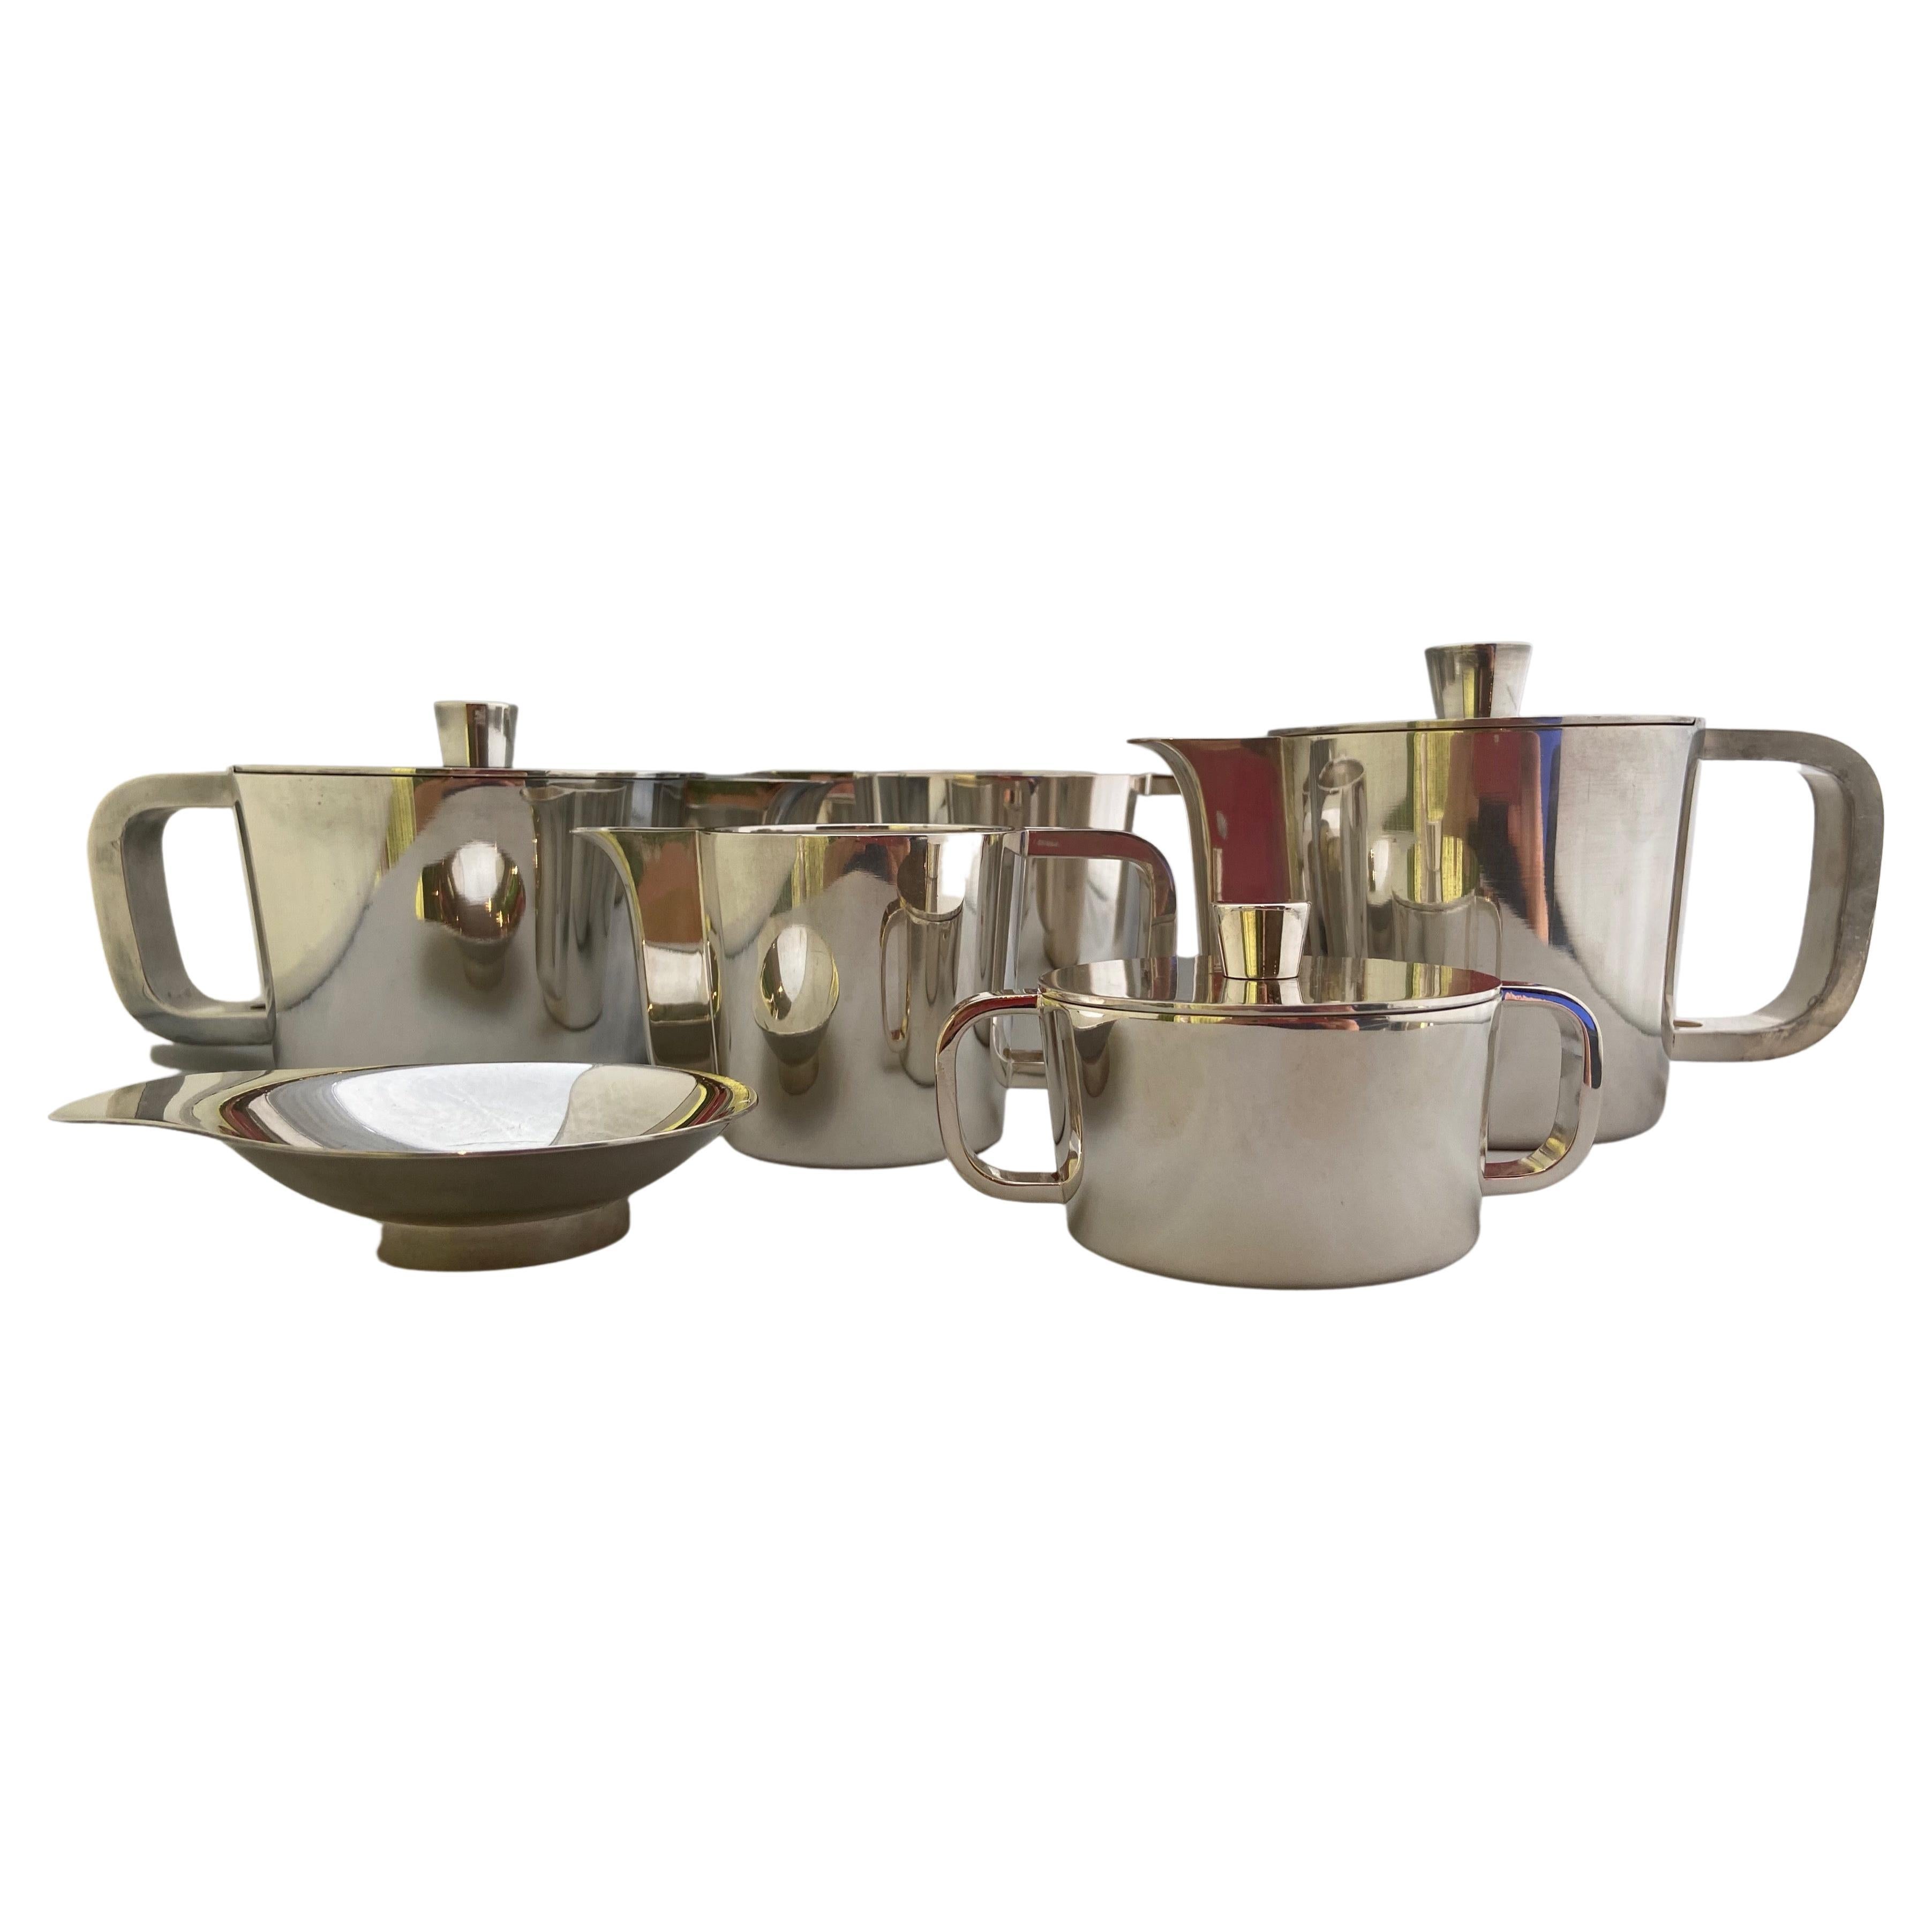 Mid-Century Modern Extensive Silver Plated Gio Ponti Coffee and Tea Set on a Tray, for Arthur Krupp